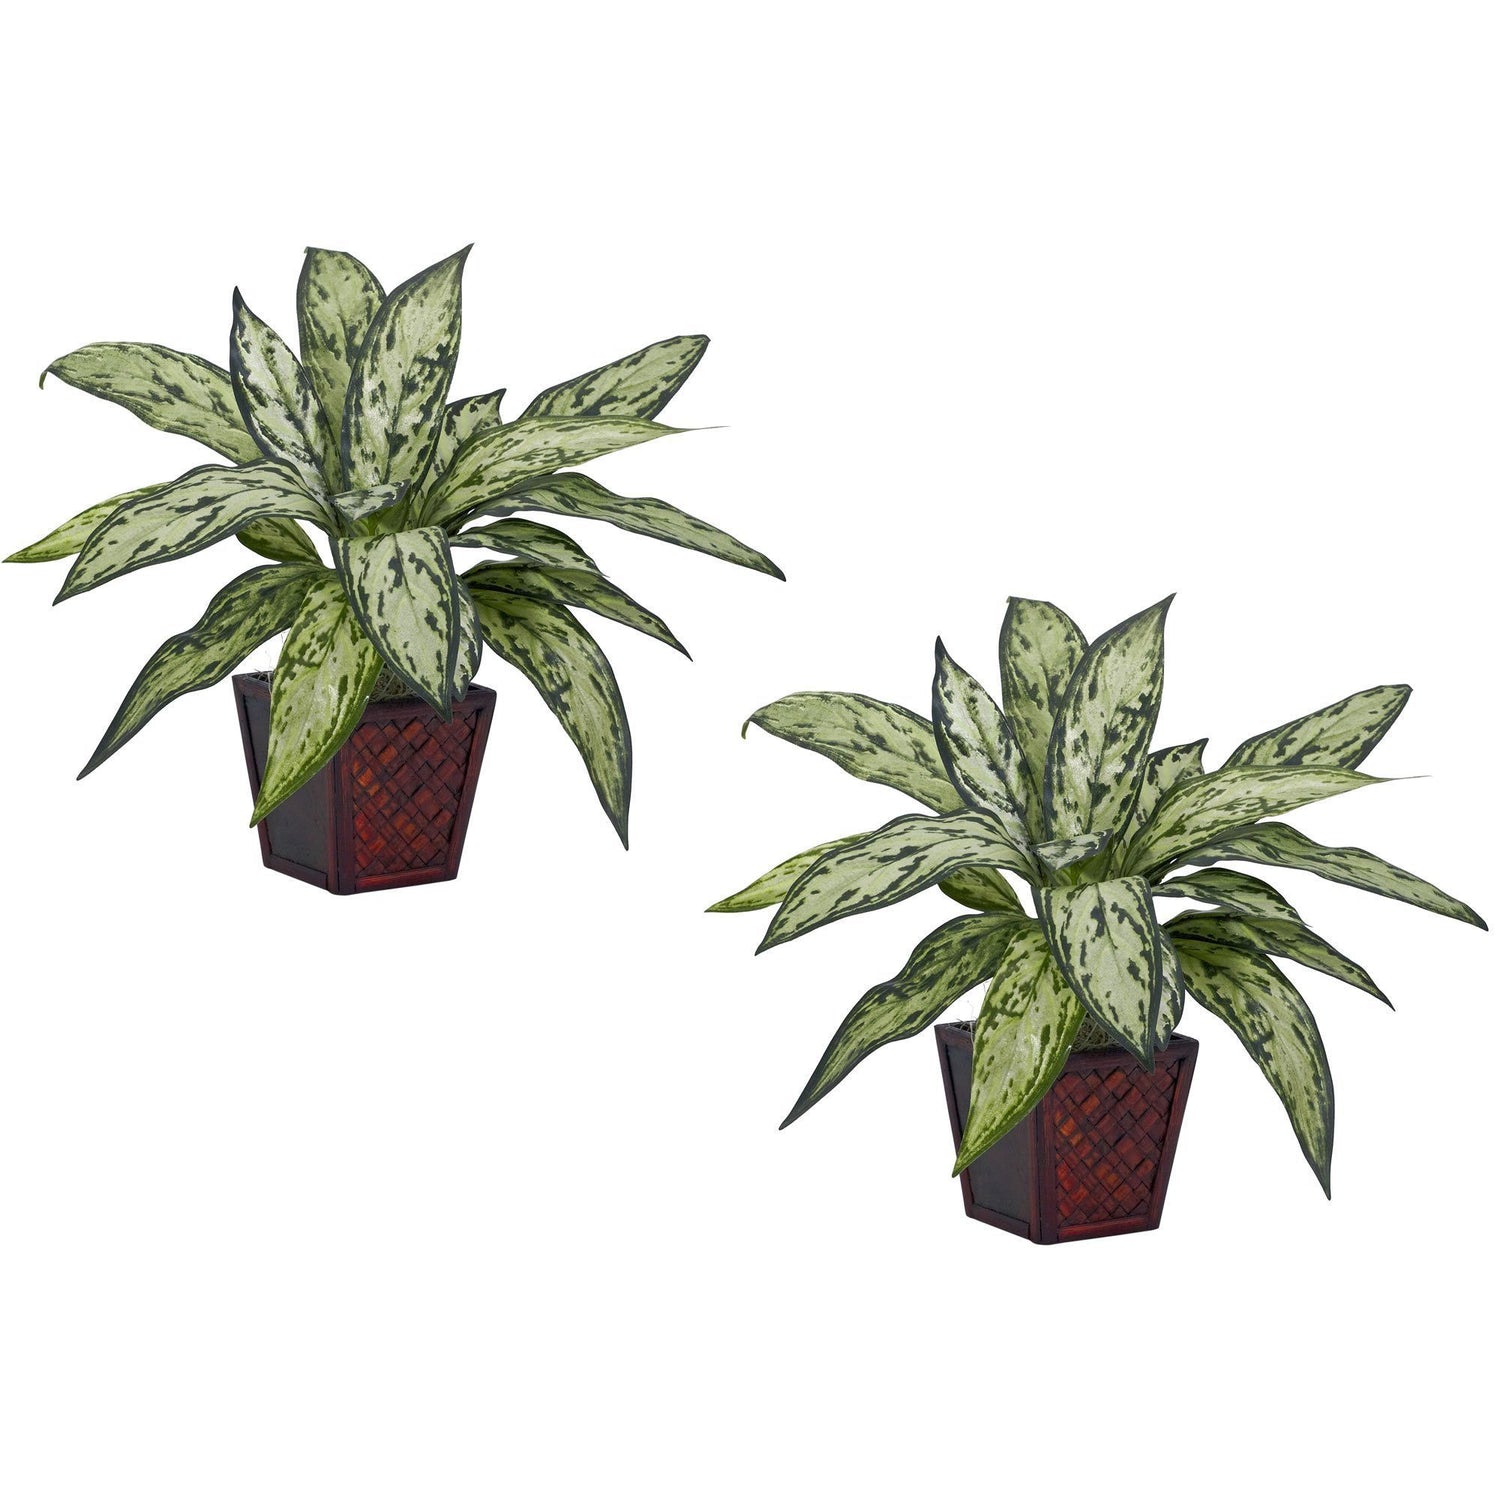 Silver Queen Silk Plant (Set of 2)